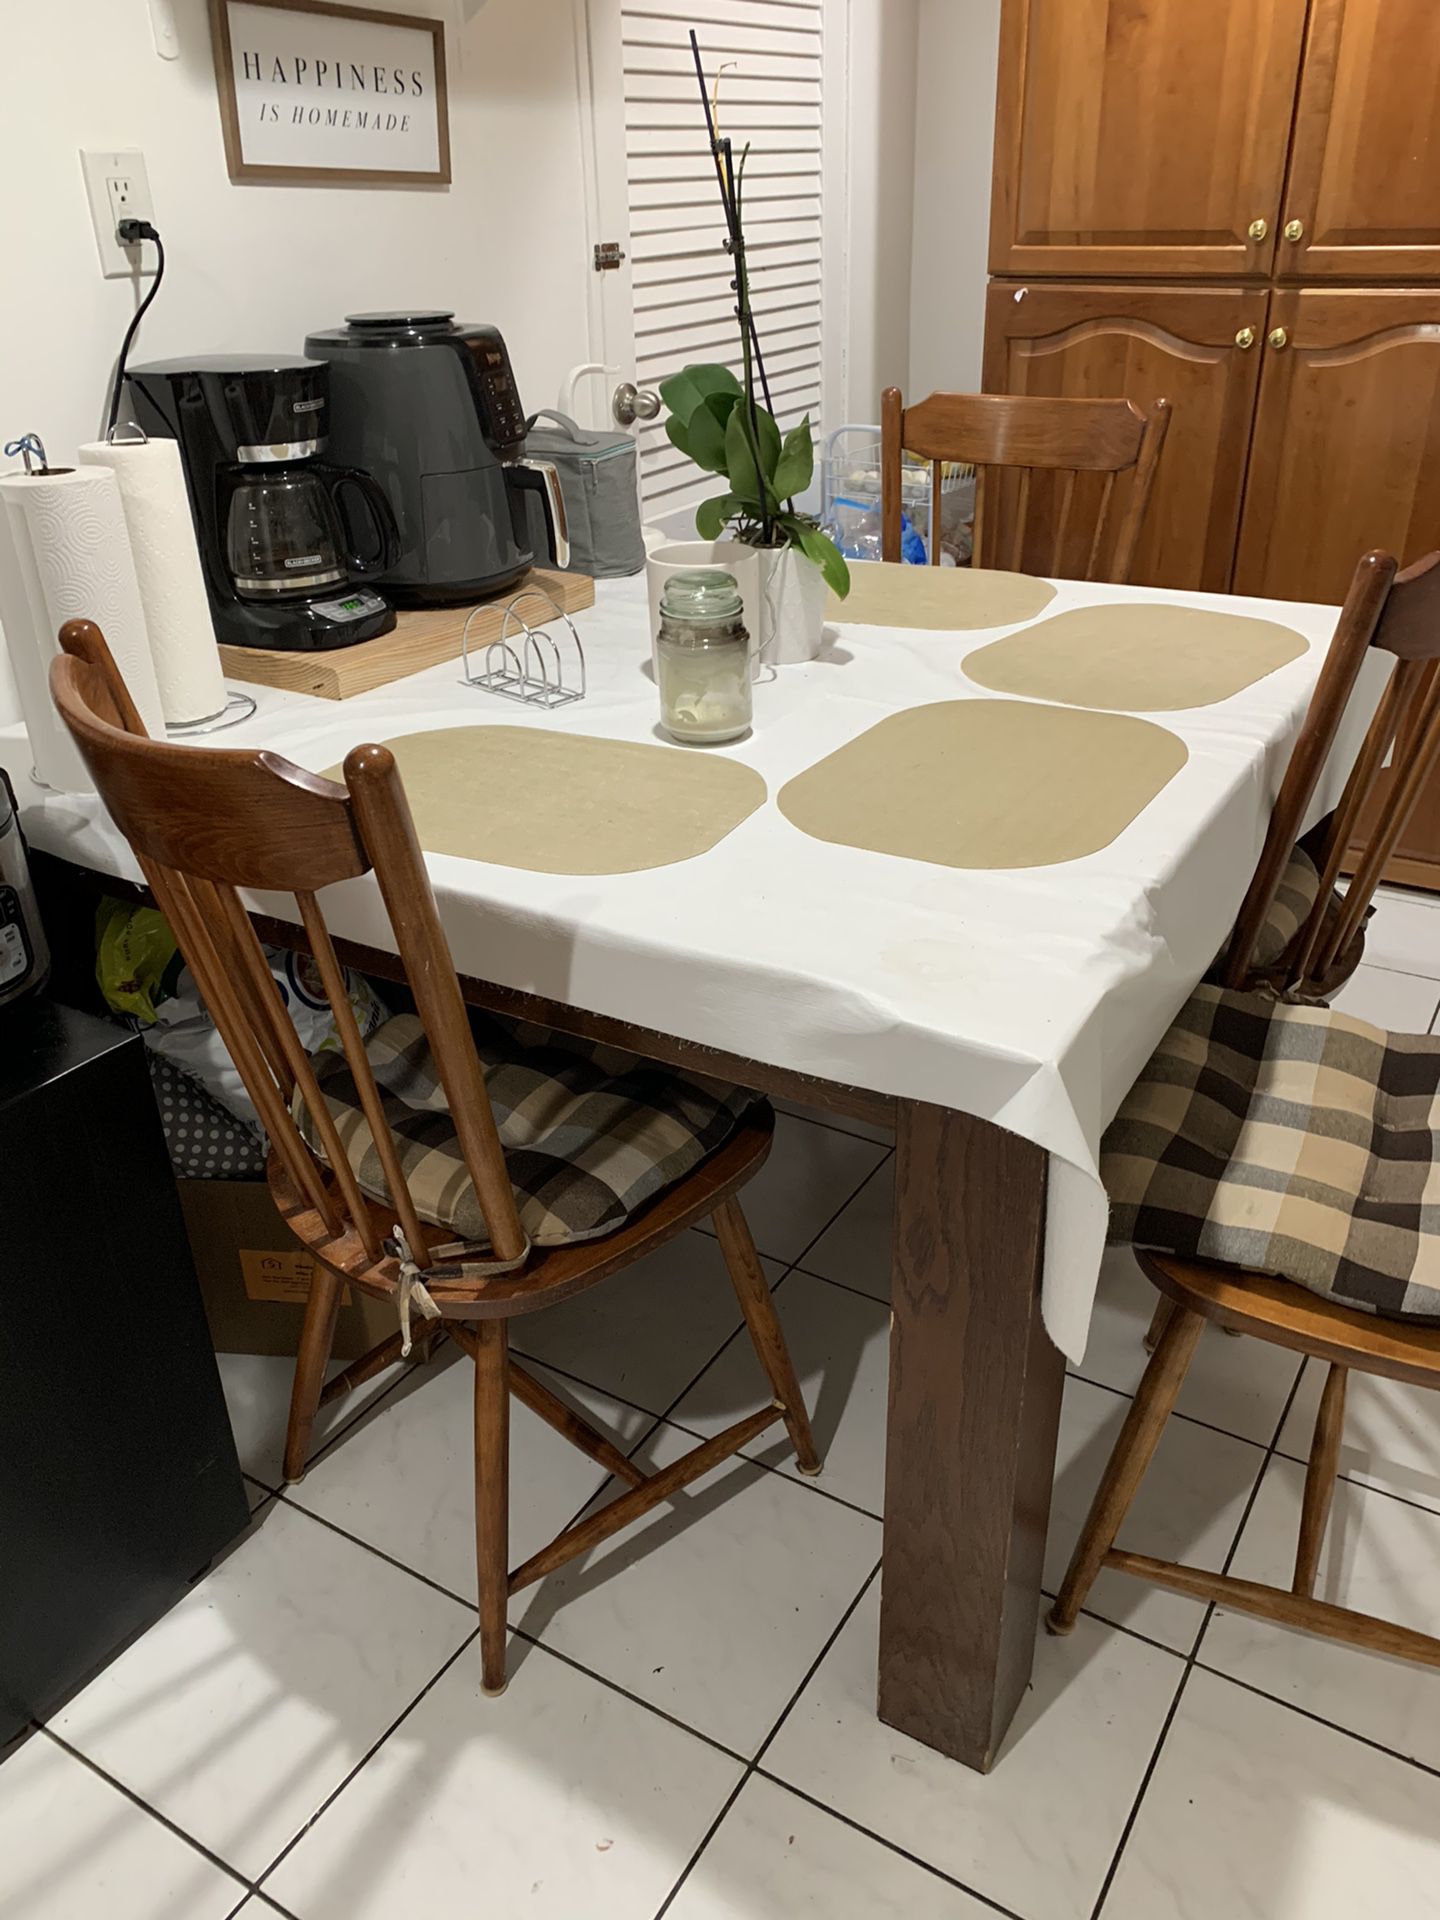 Solid wood table with 4 chairs